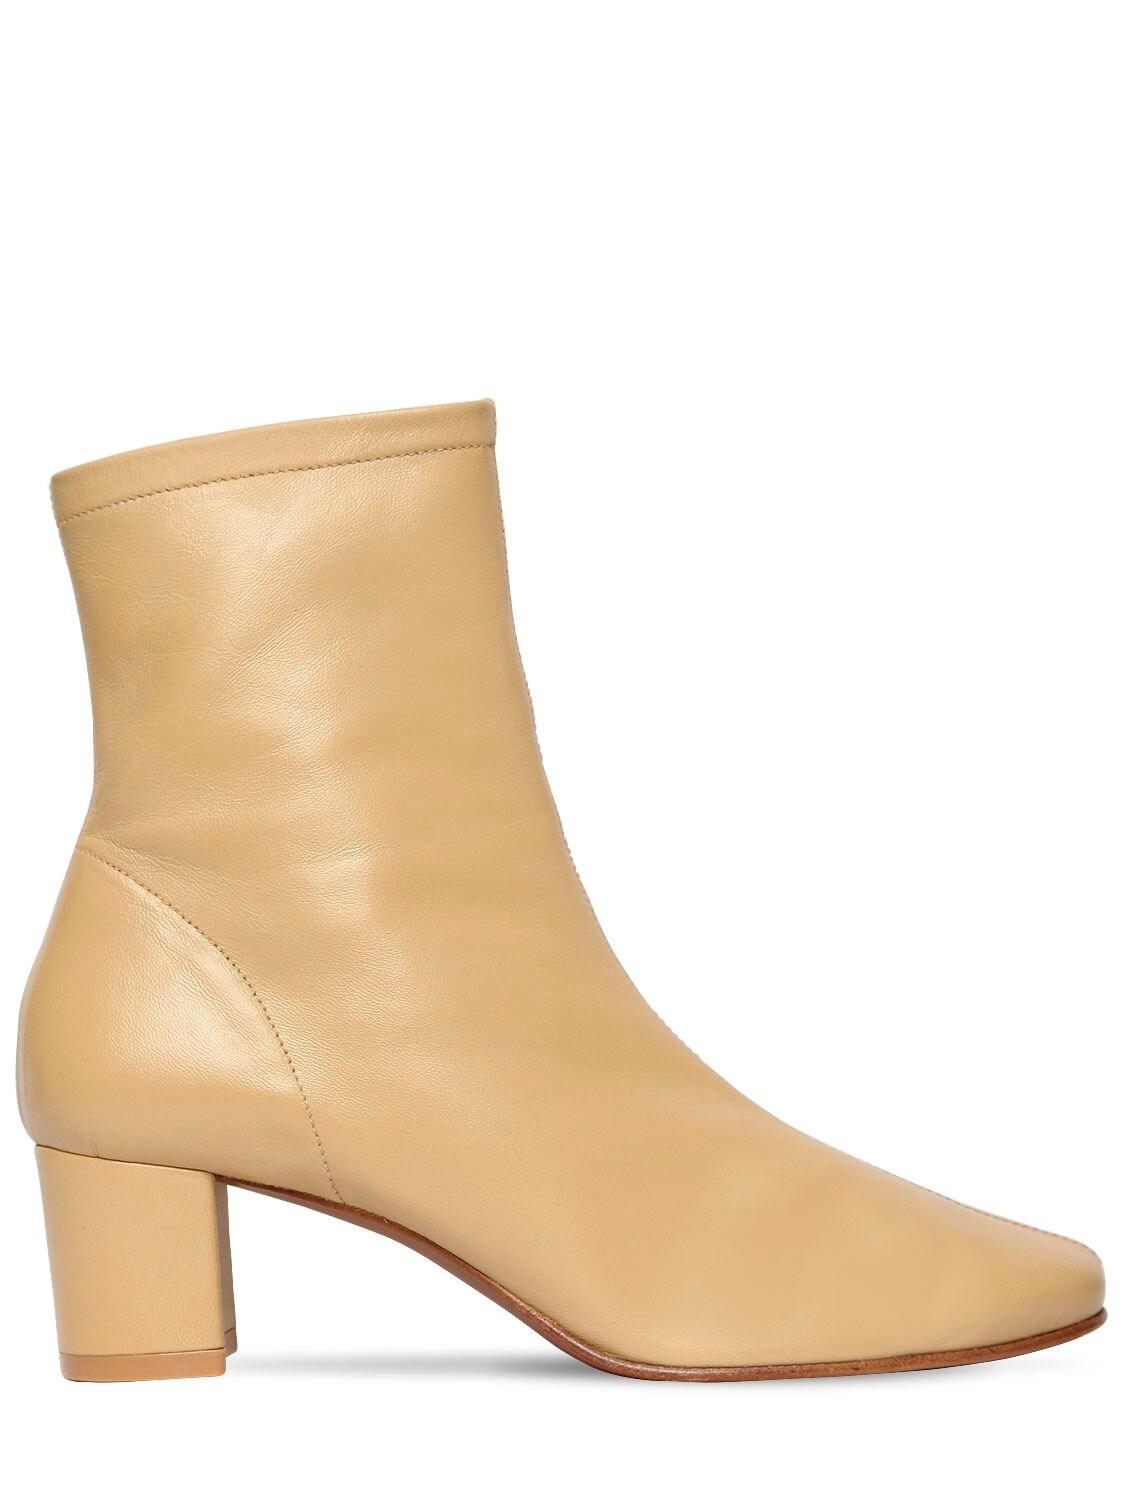 BY FAR 50mm Sofia Leather Ankle Boots in Cream (Natural) - Lyst